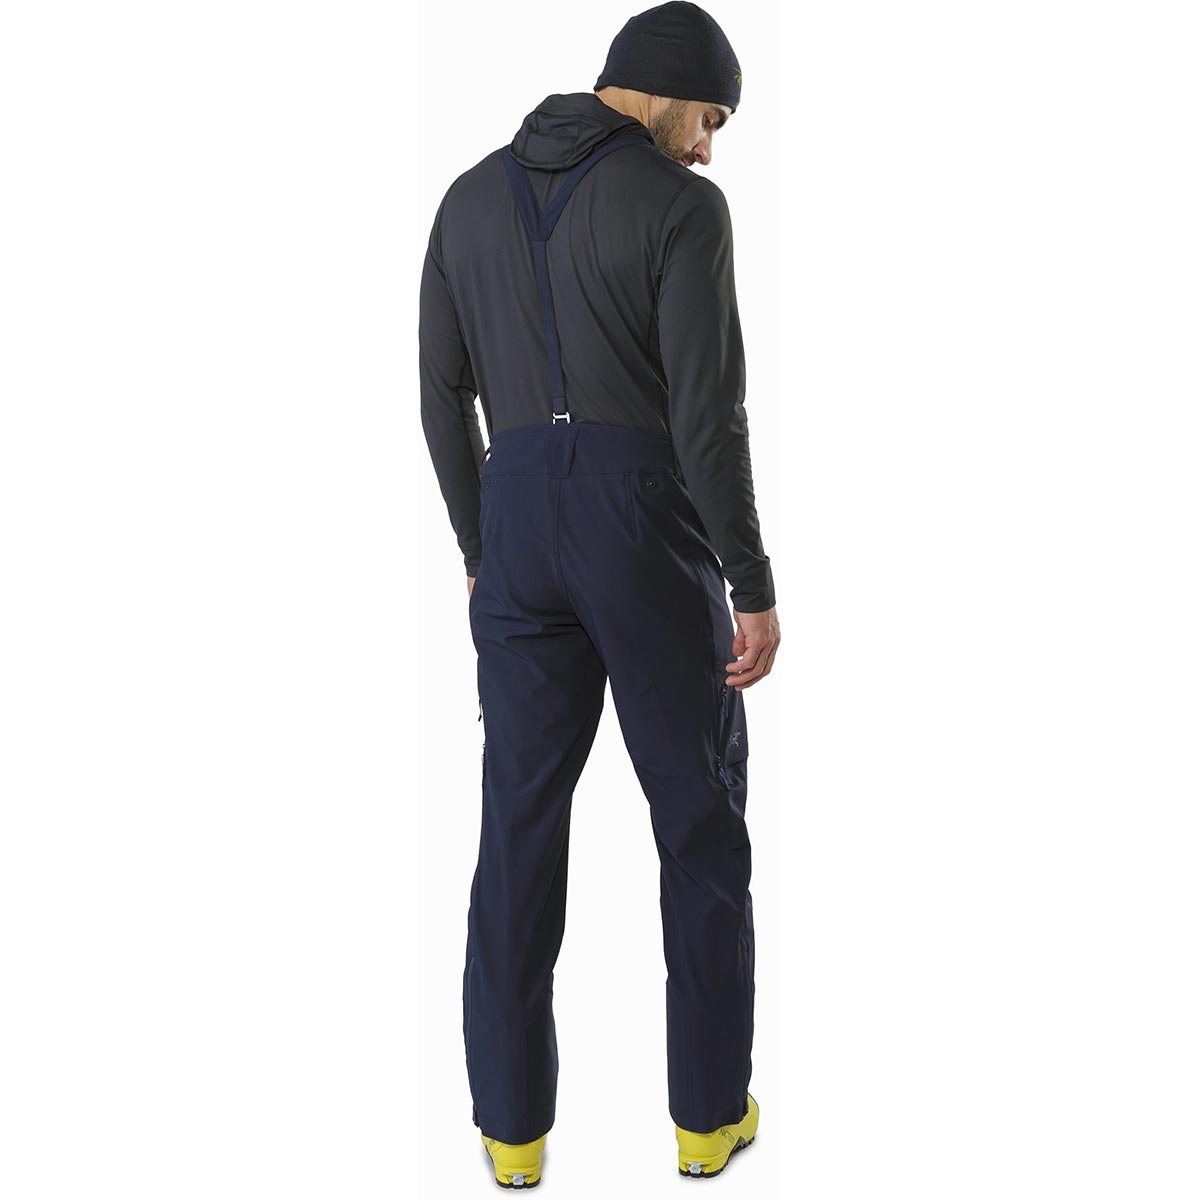 Arc'teryx Rush FL Pant, men's, discontinued Fall 2018 colors (free ground shipping 